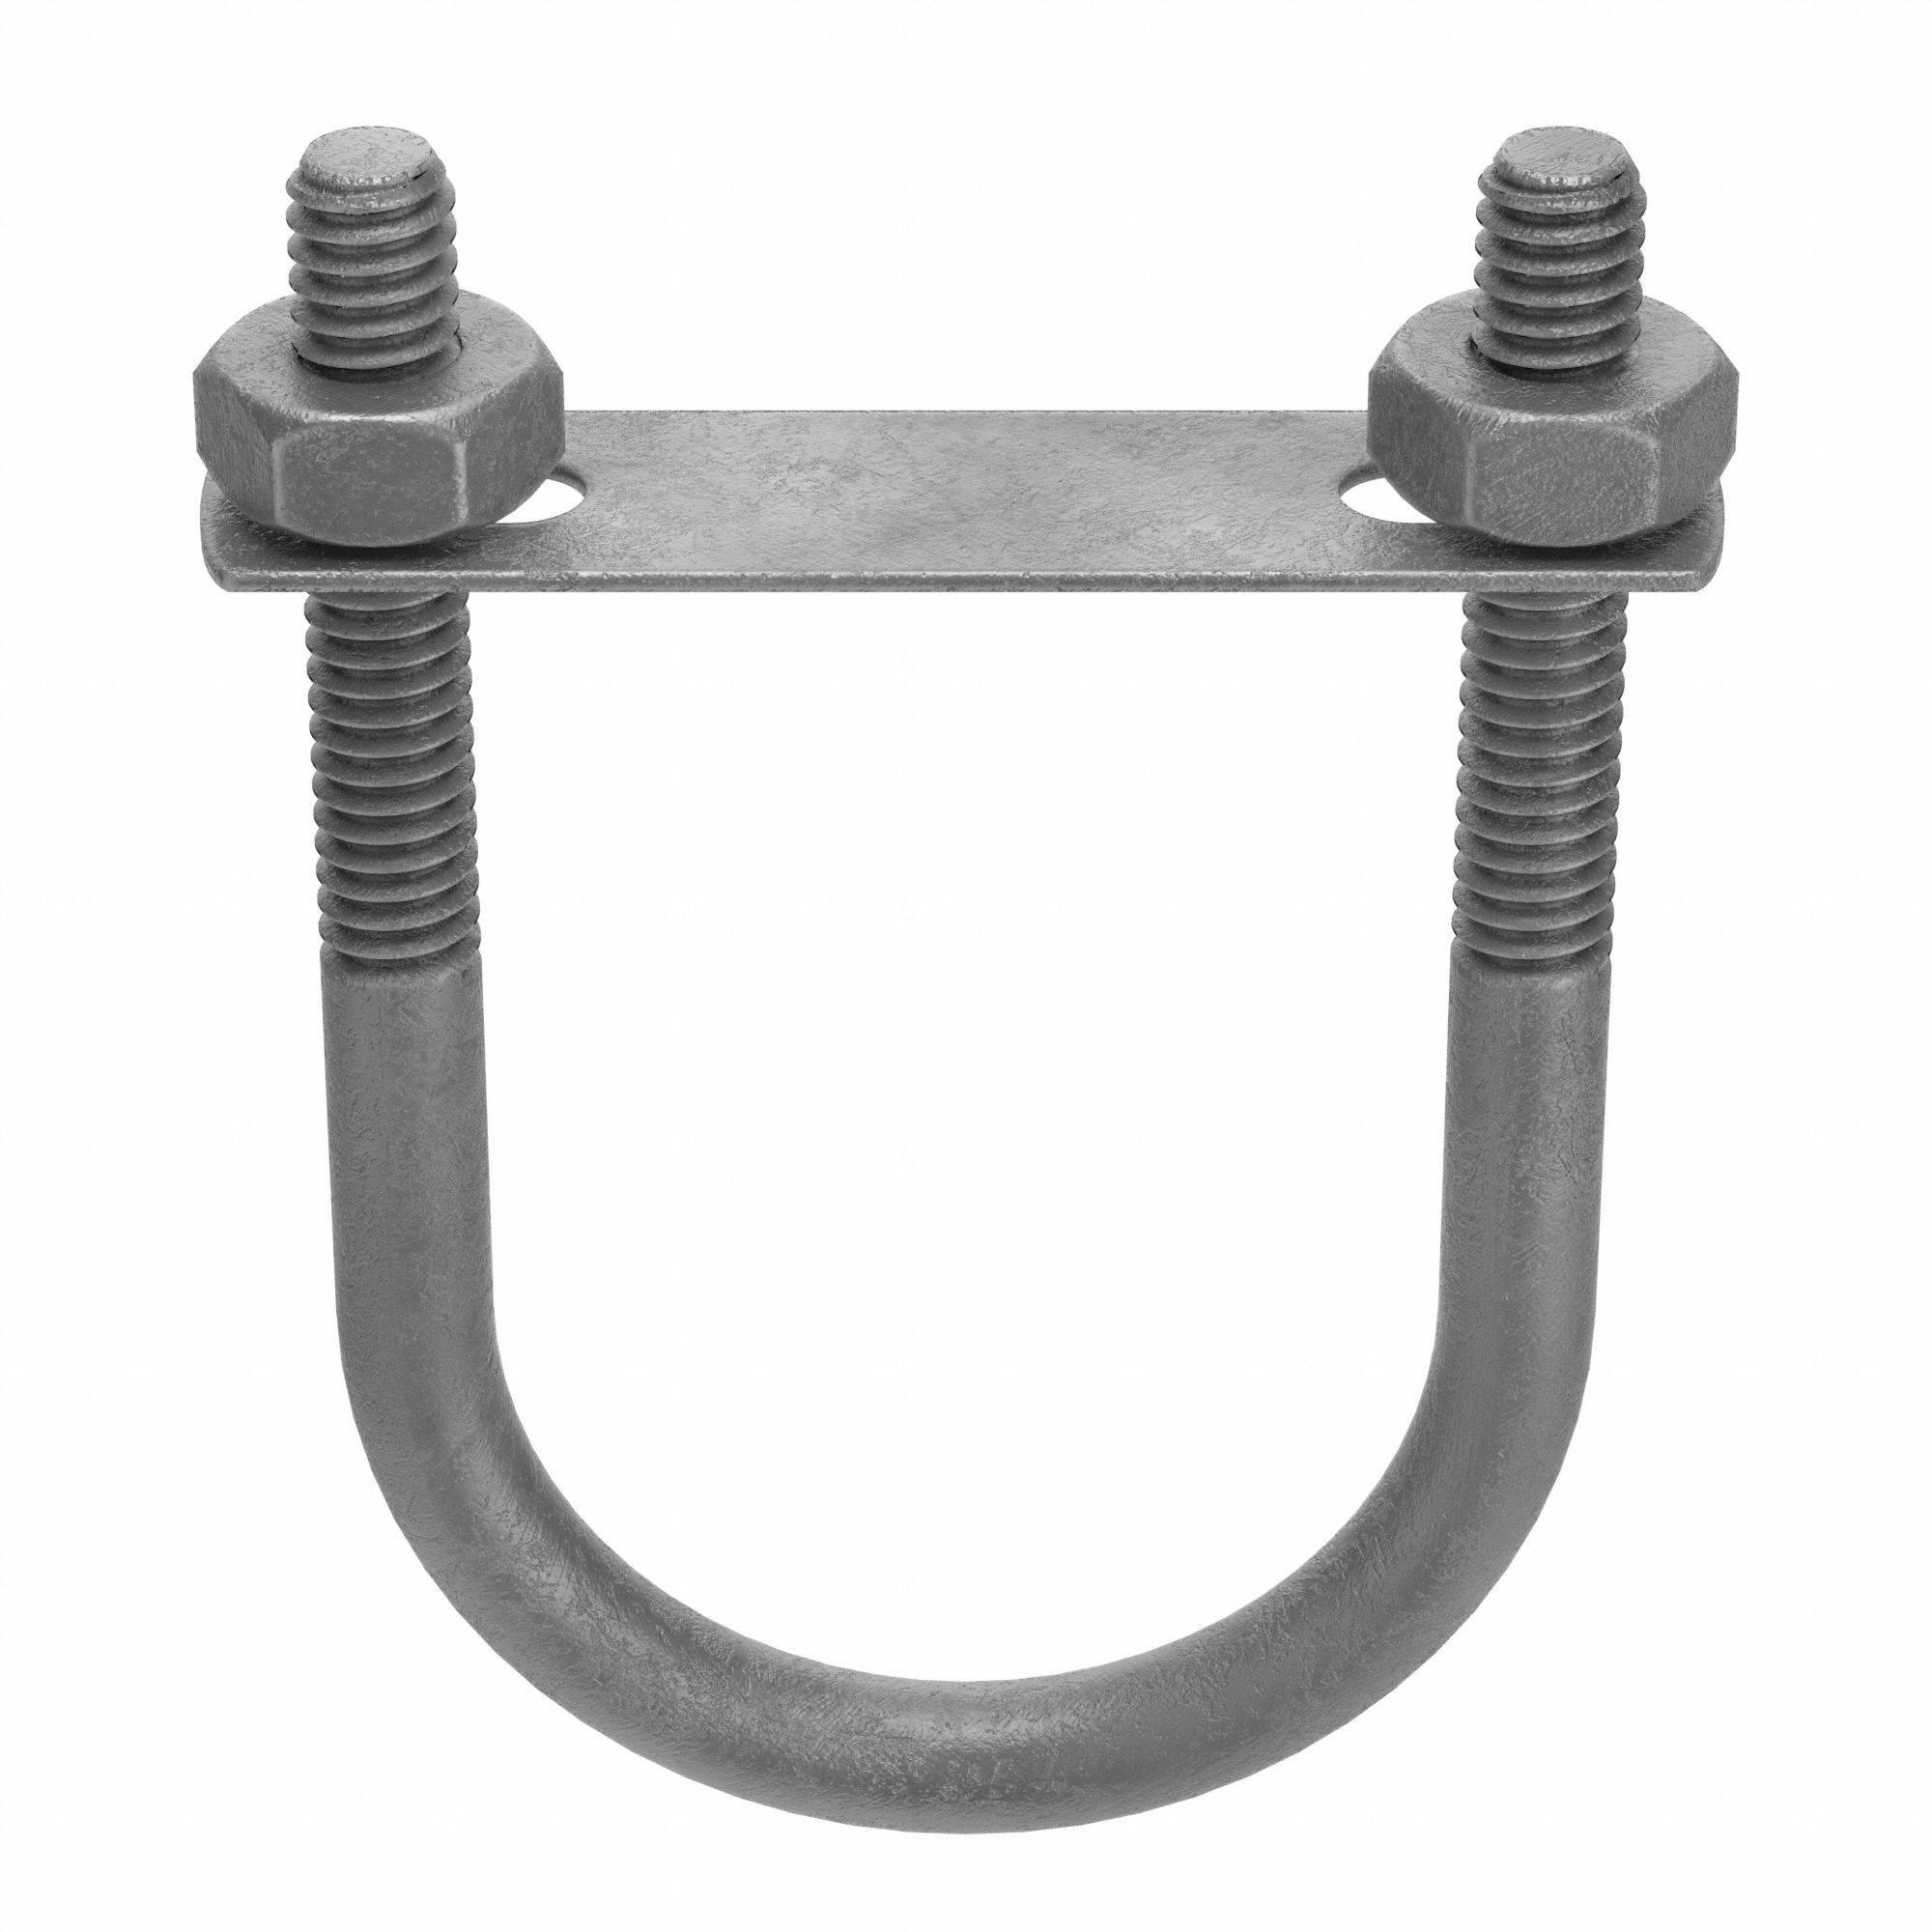 Standard U-Bolt with Mounting Plate: Steel, Hot Dipped Galvanized, 1/4